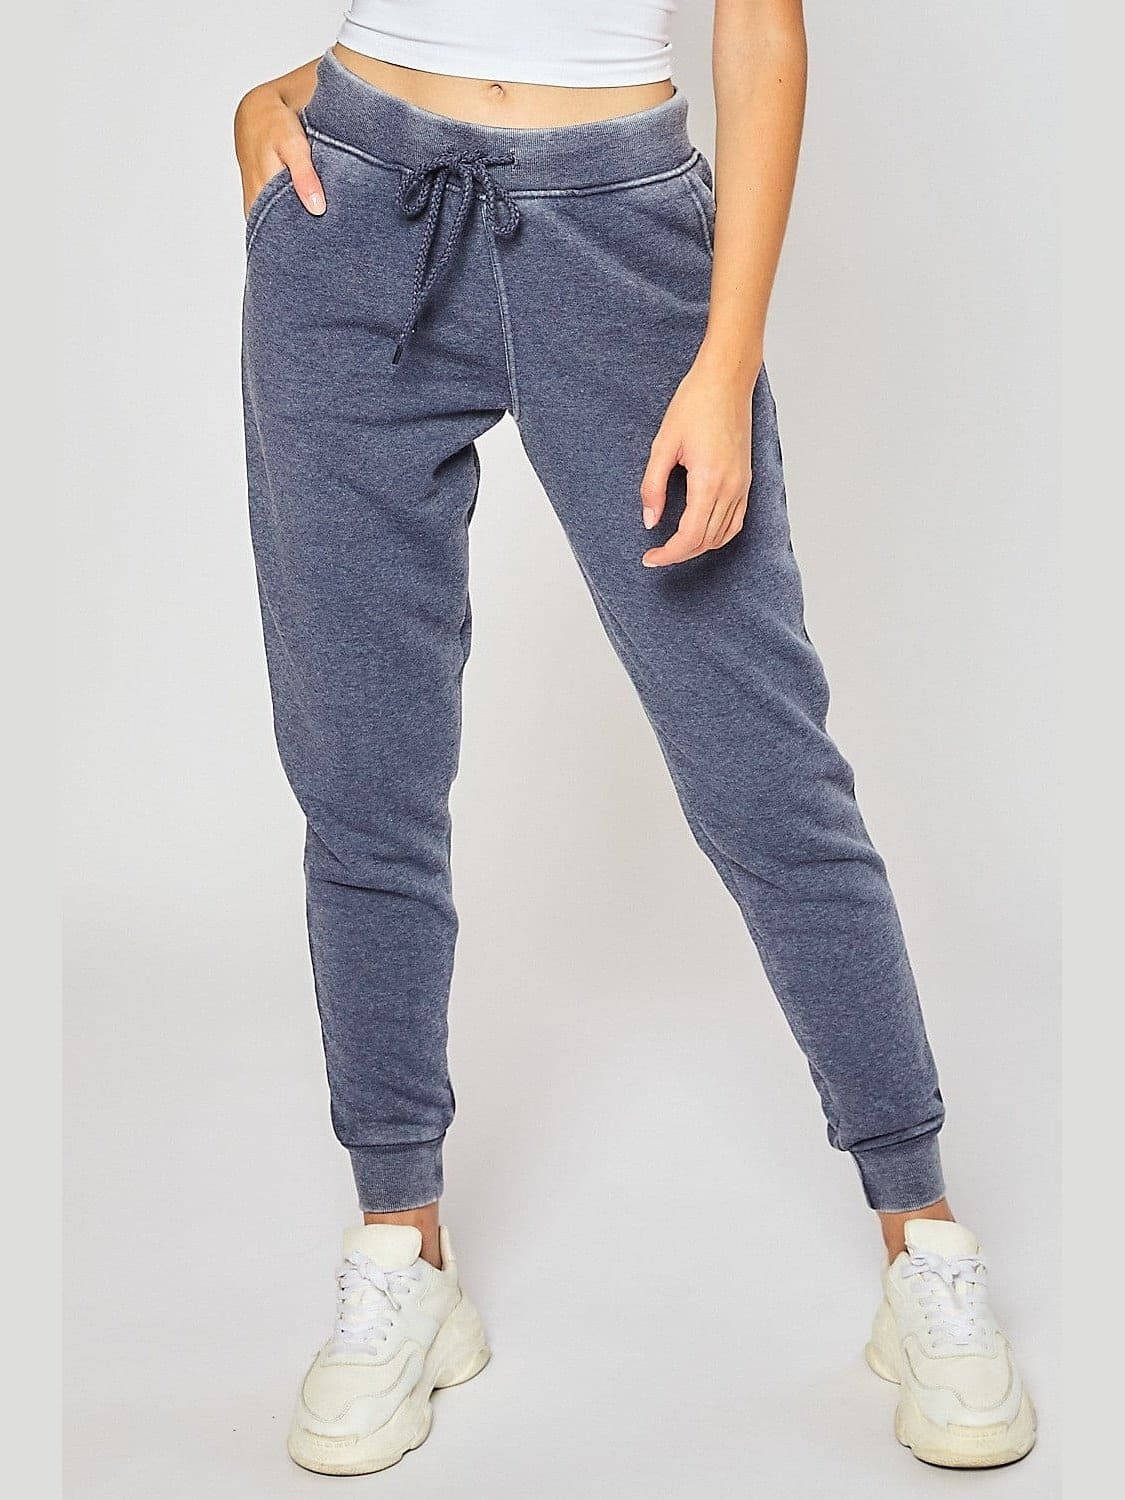 FLEECE BURN OUT RELAX FIT JOGGER - BKFJNY